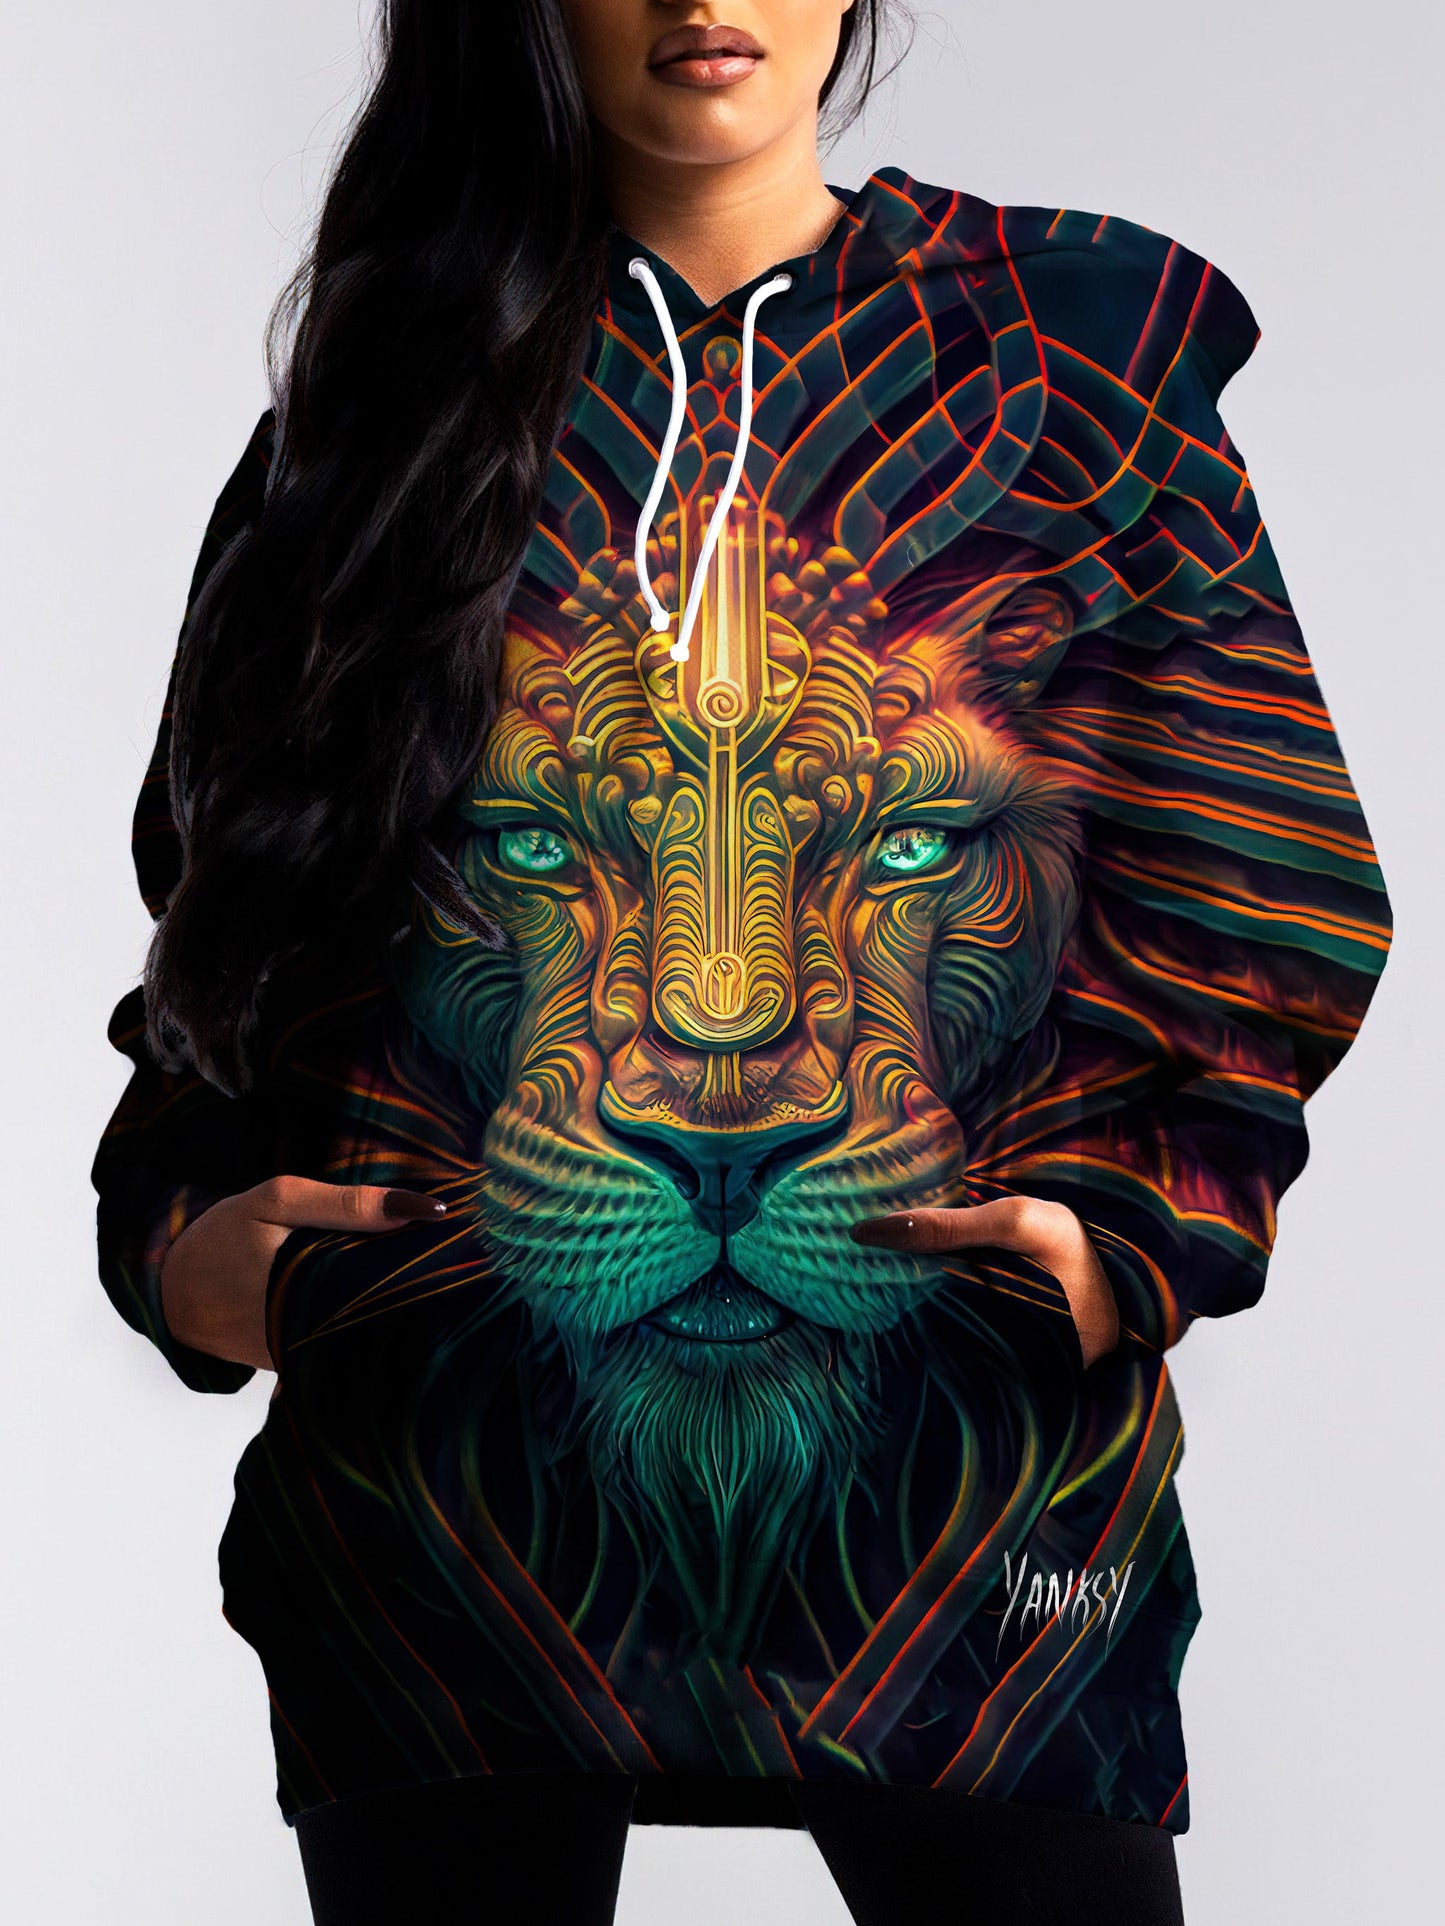 Perfect for raves and festivals, this comfortable pullover hoodie will keep you feeling your best